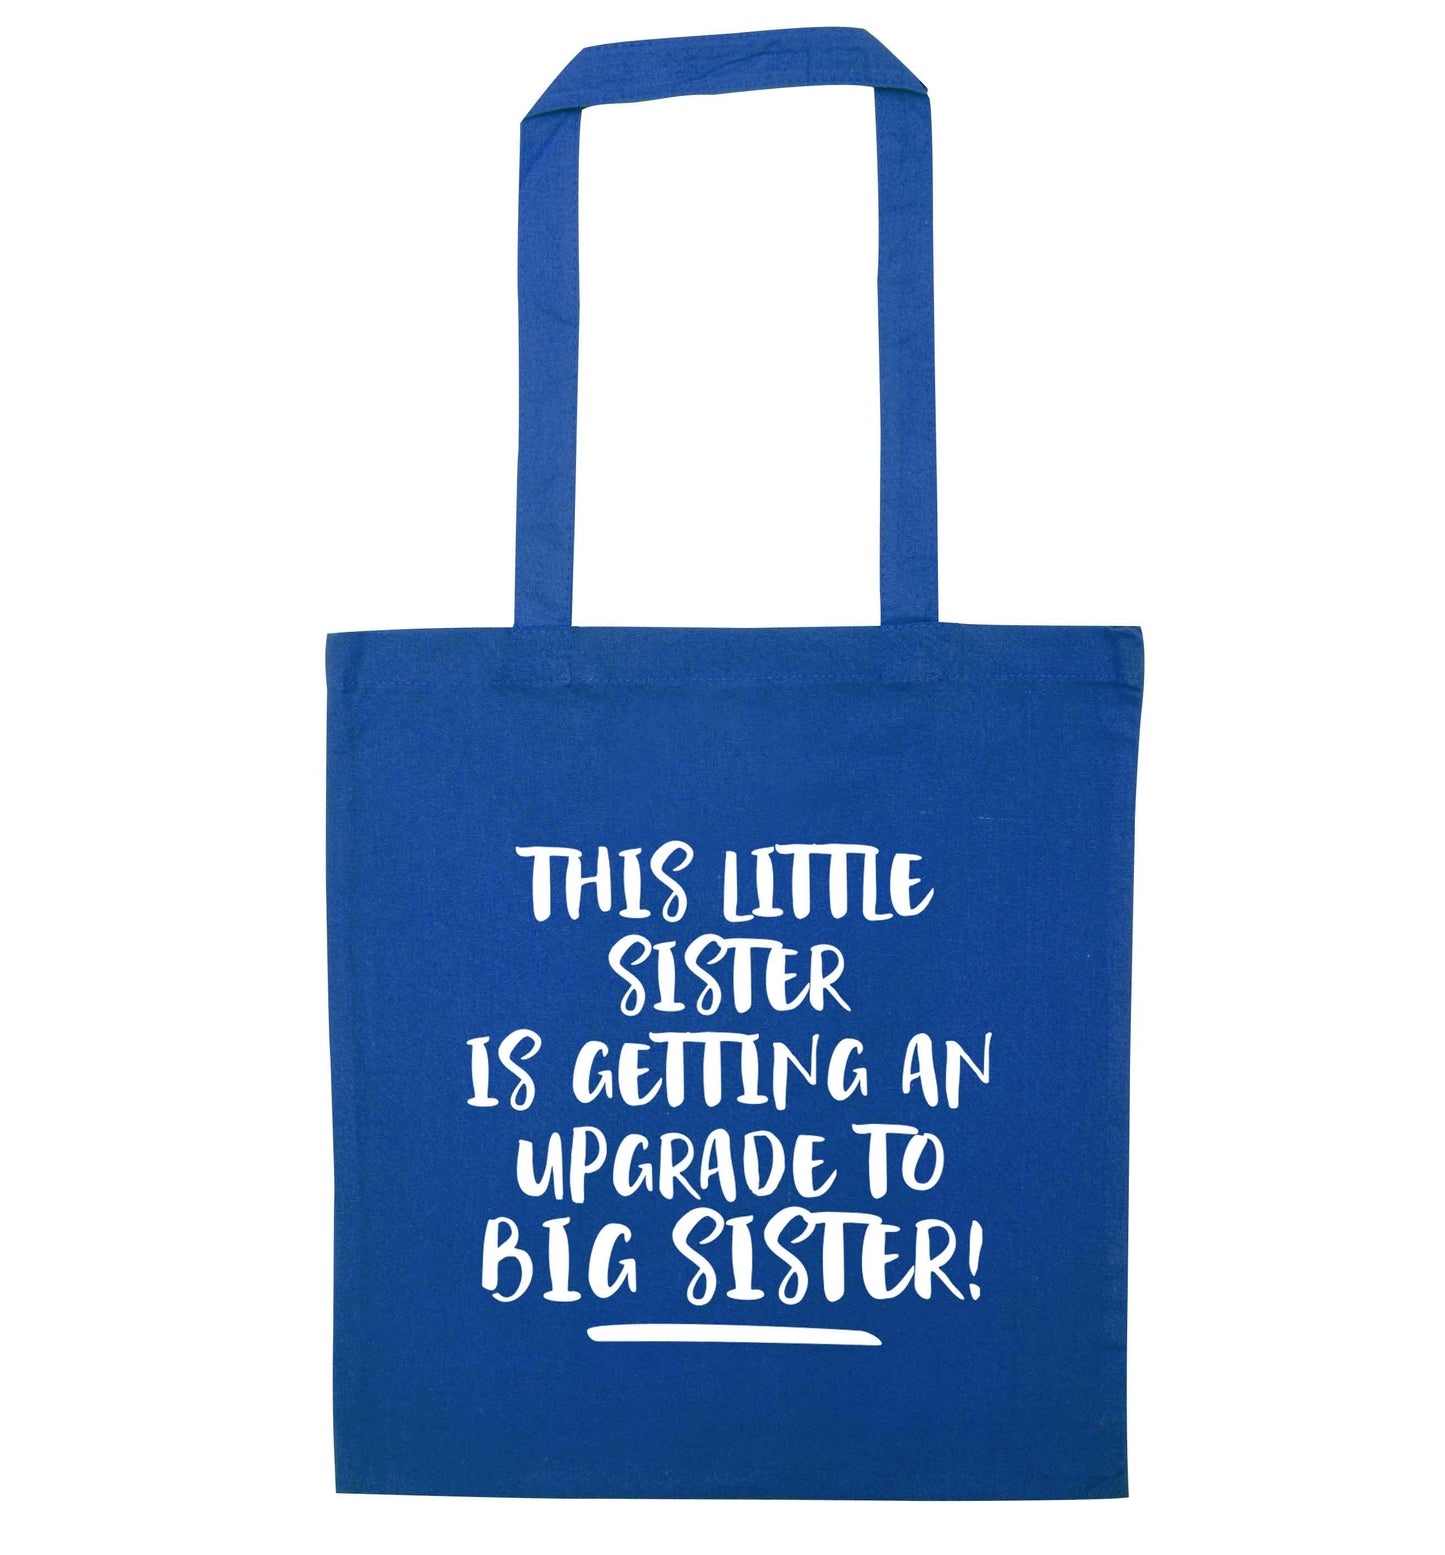 This little sister is getting an upgrade to big sister! blue tote bag